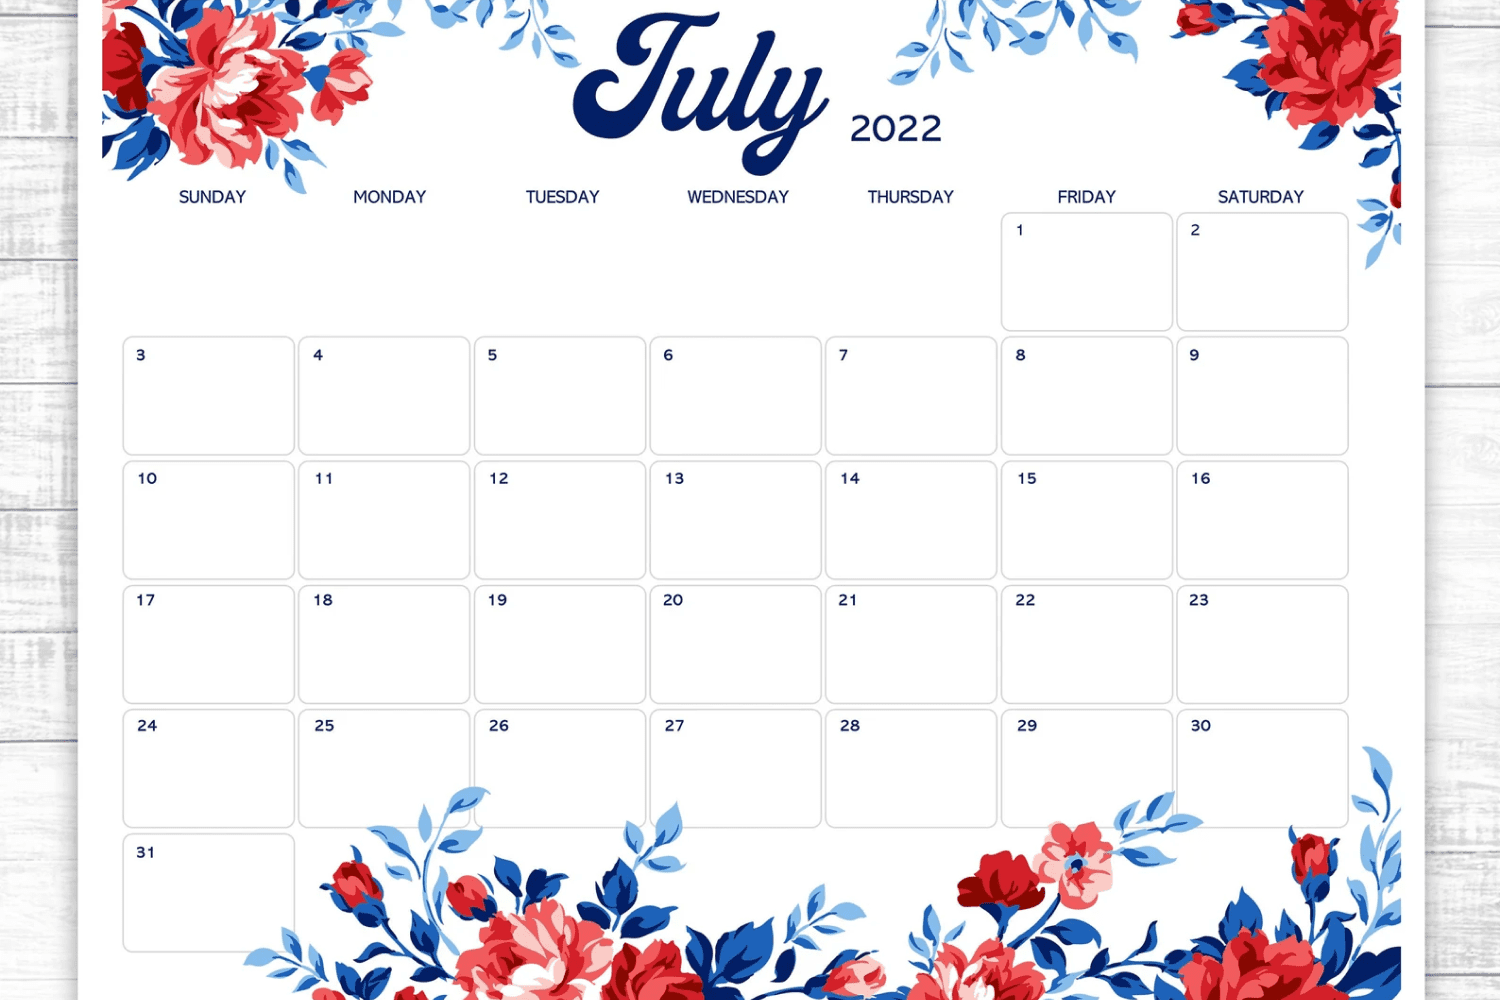 Calendar with flowers in red and blue colors.